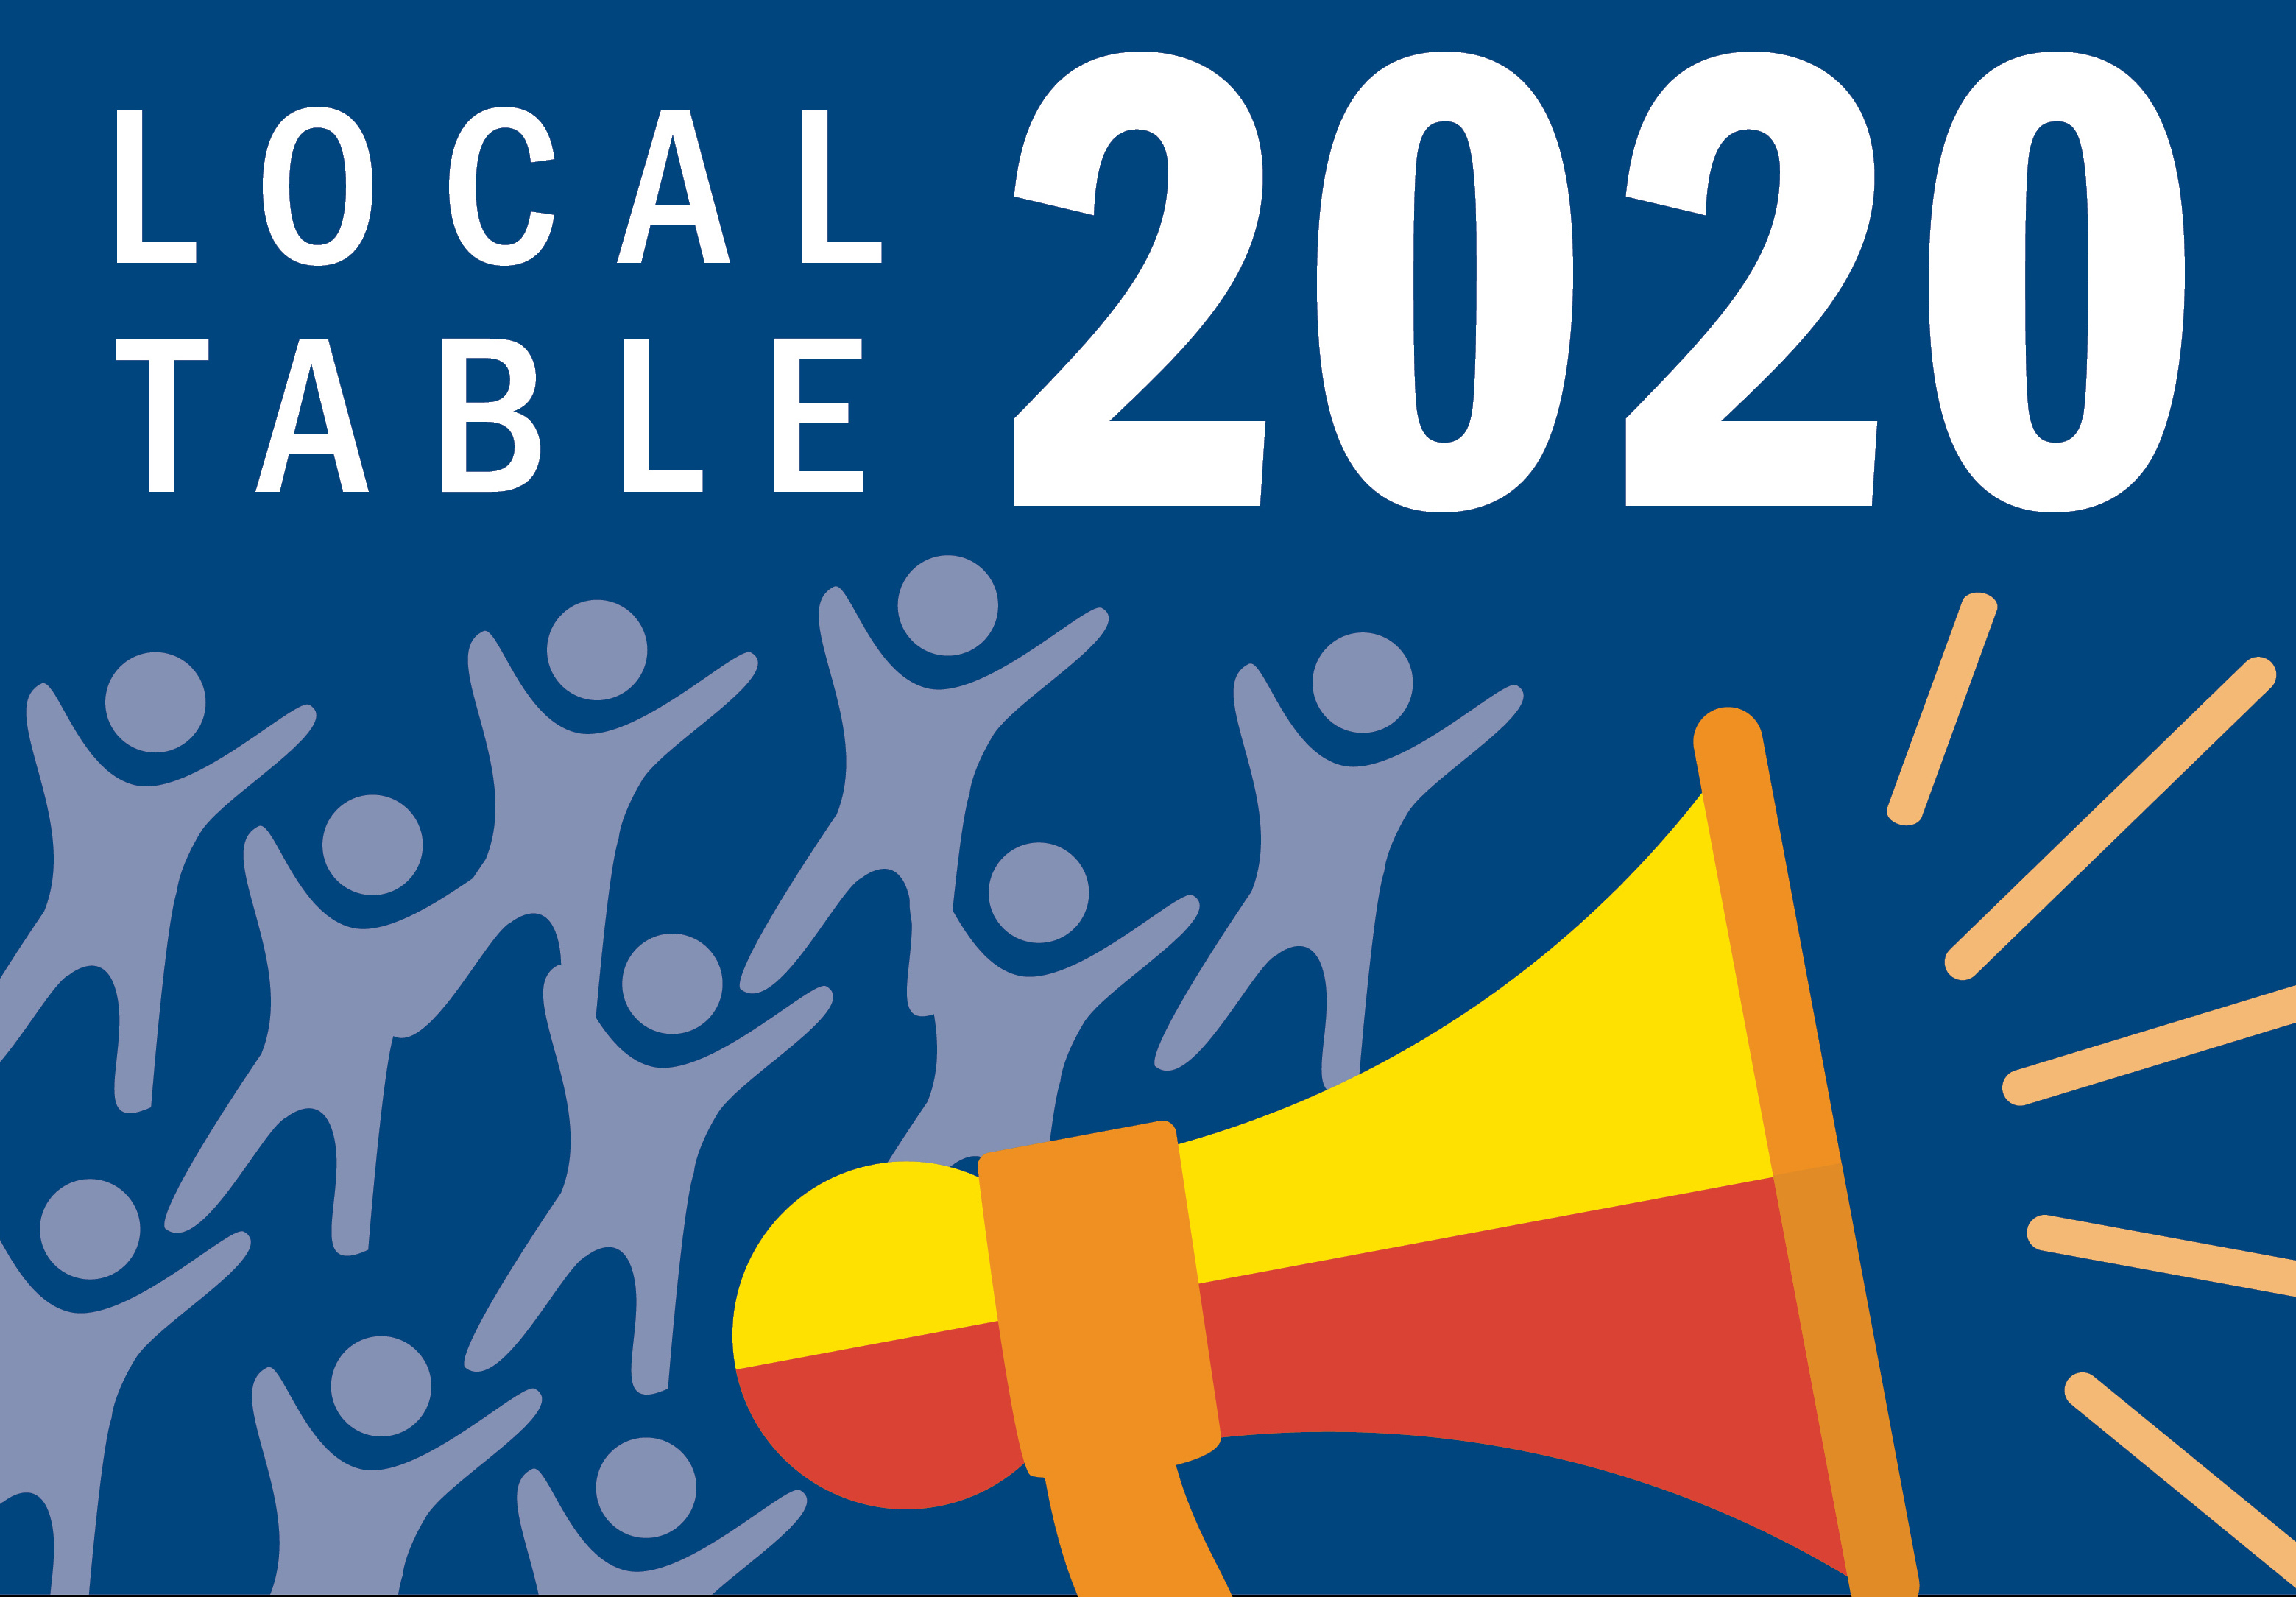 Cartoon image of Local Table 2020